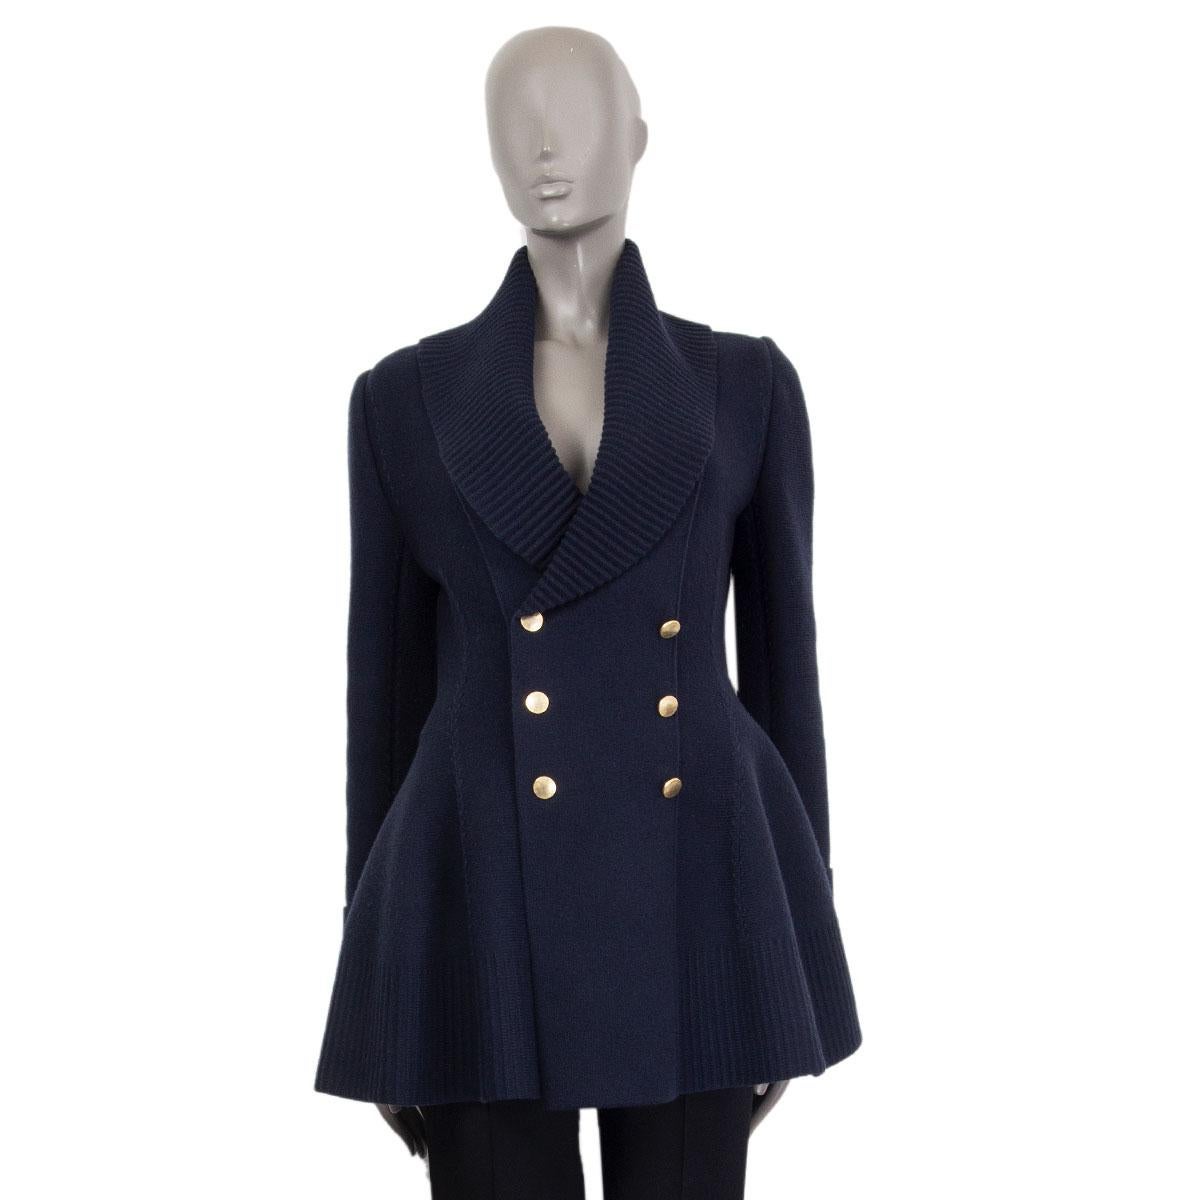 Alexander McQueen double breasted jacket in navy blue wool (79%), cashmere (19%), polyamide (1%) and elastane (1%) with a wide collar. Closes on the front with gold tone buttons. Unlined. Has been worn and is in excellent condition. 

Tag Size M